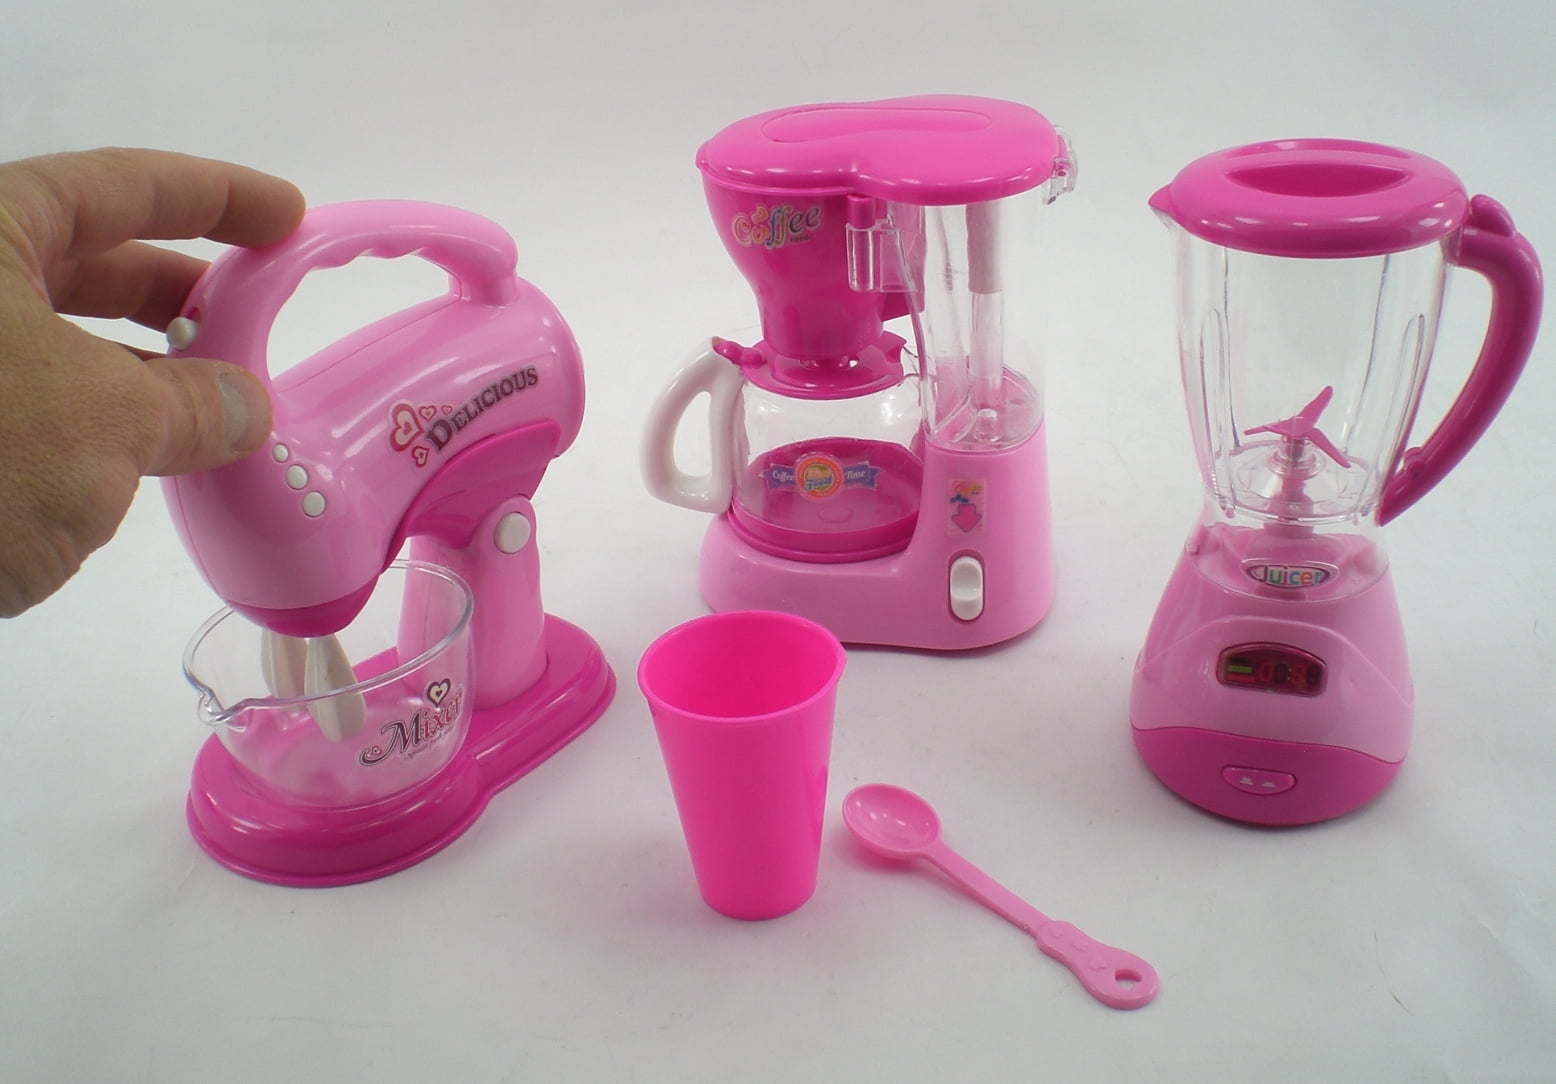 Miniature Real Working Blender Pink: Mini Cooking Kitchen Appliance – Real  Mini World